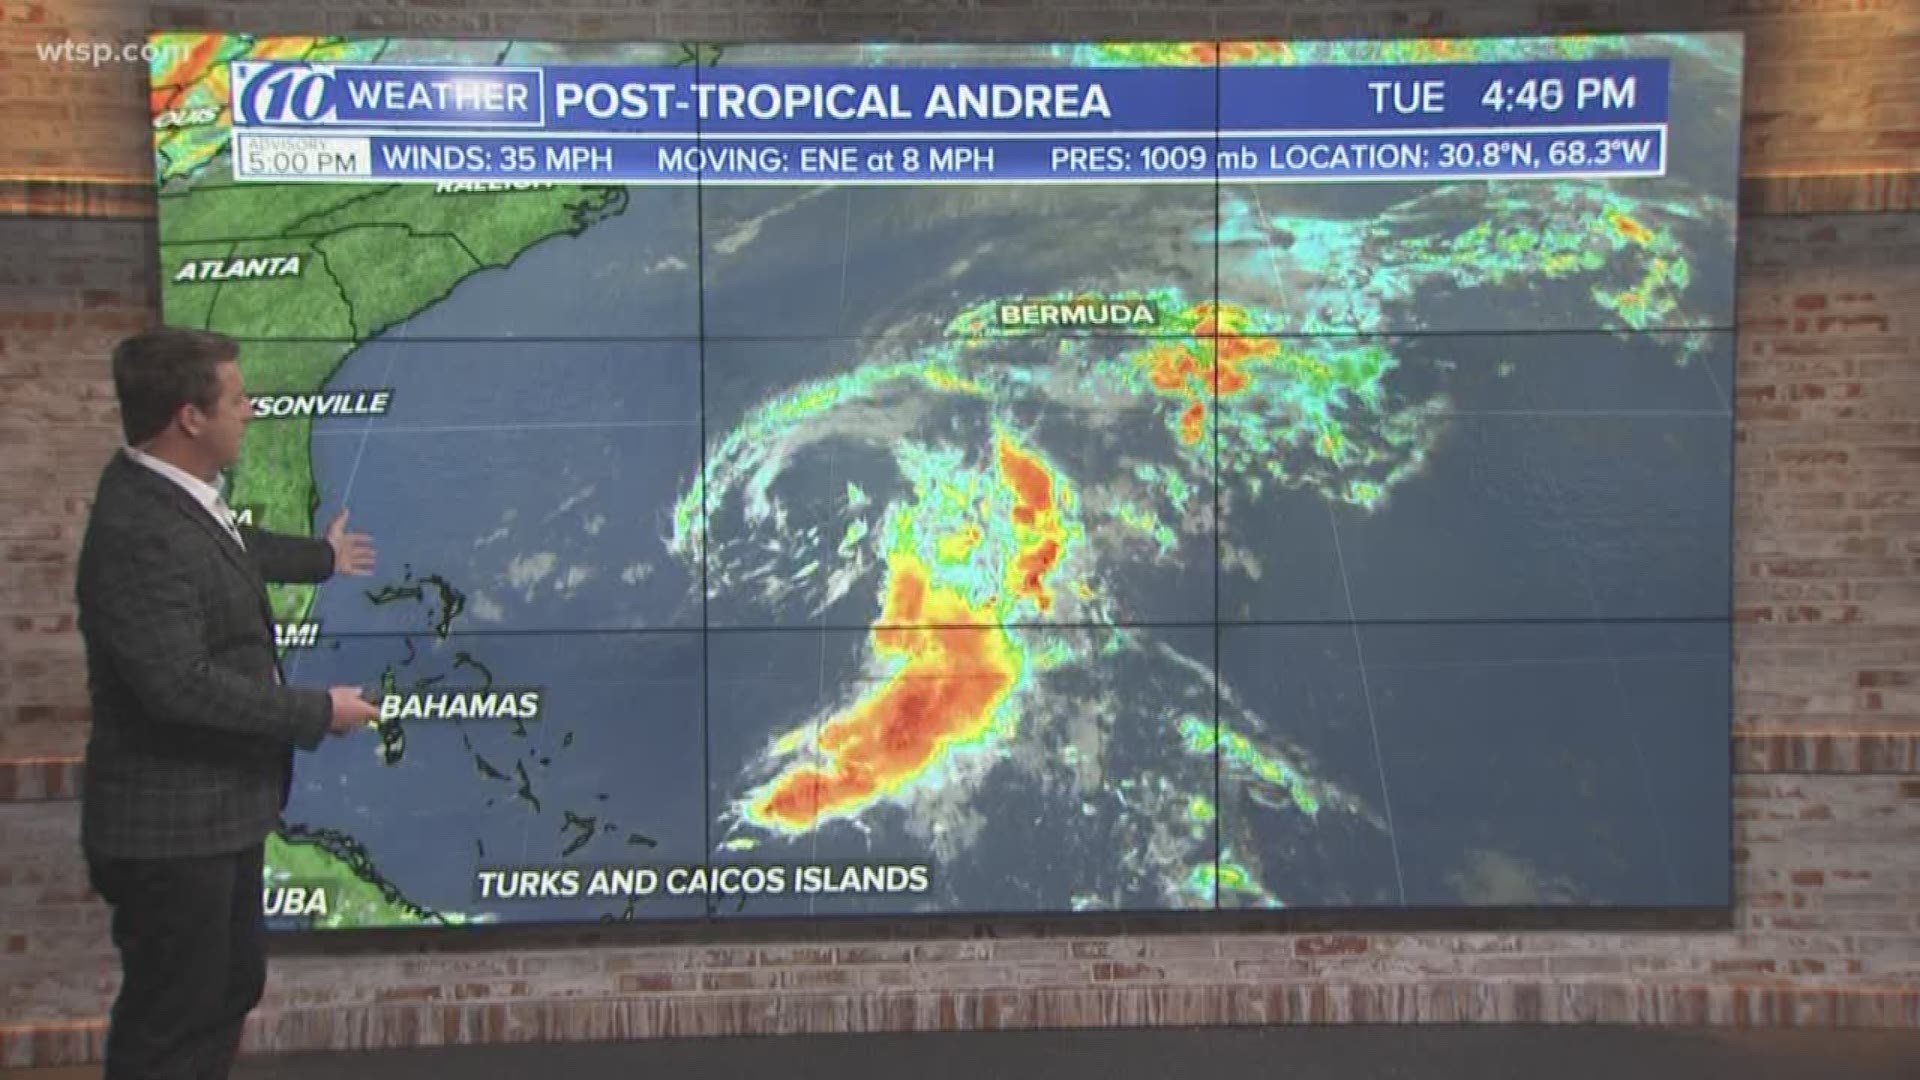 Andrea, we hardly knew you.

The National Hurricane Center issued its last advisory on the Atlantic disturbance, calling it a "remnant low" and expects it to dissipate by Wednesday morning.

As of the 5 p.m. Tuesday advisory, Andrea was located about 230 miles west-southwest of Bermuda and moving east-northeast at 8 mph.

Its maximum sustained winds were listed at 35 mph.